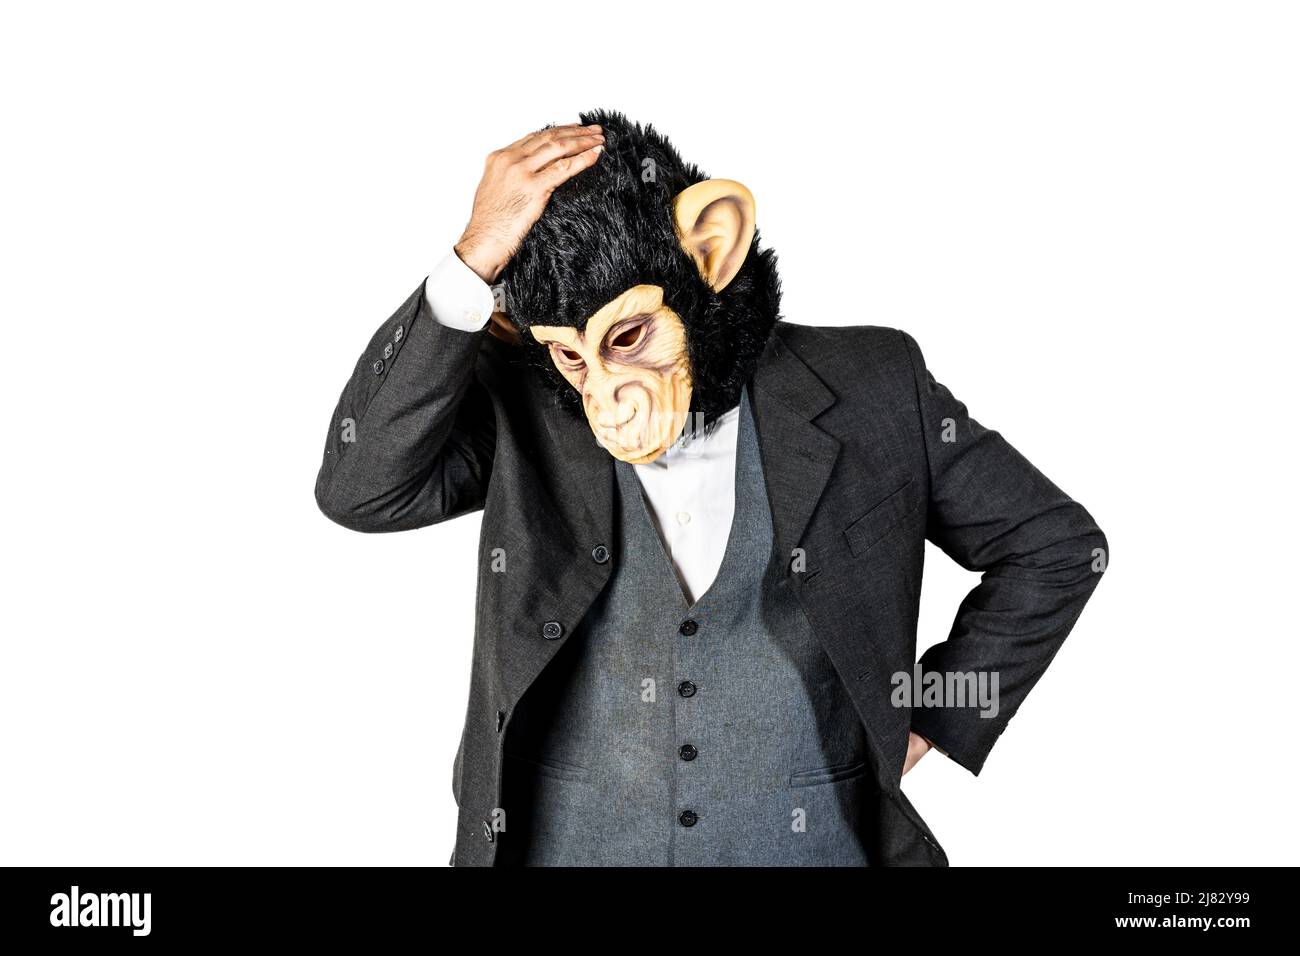 Monkey man making gesture of concern with the hand on the head Stock Photo